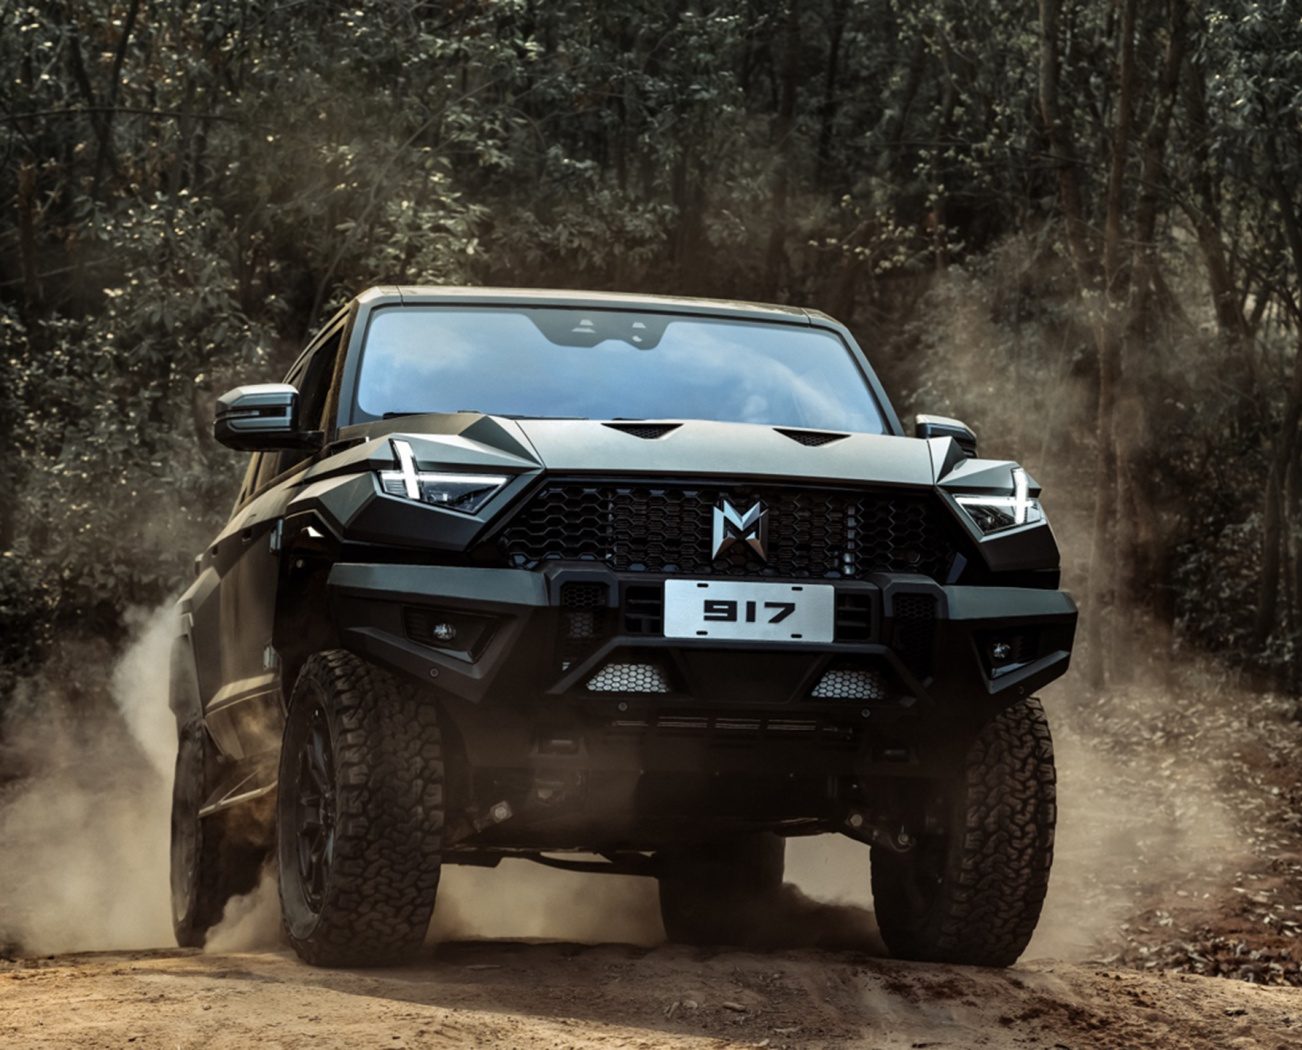 Mengshi 917: A High-Performance Luxury Off-Road SUV Launching in 2023 - Car News - 1